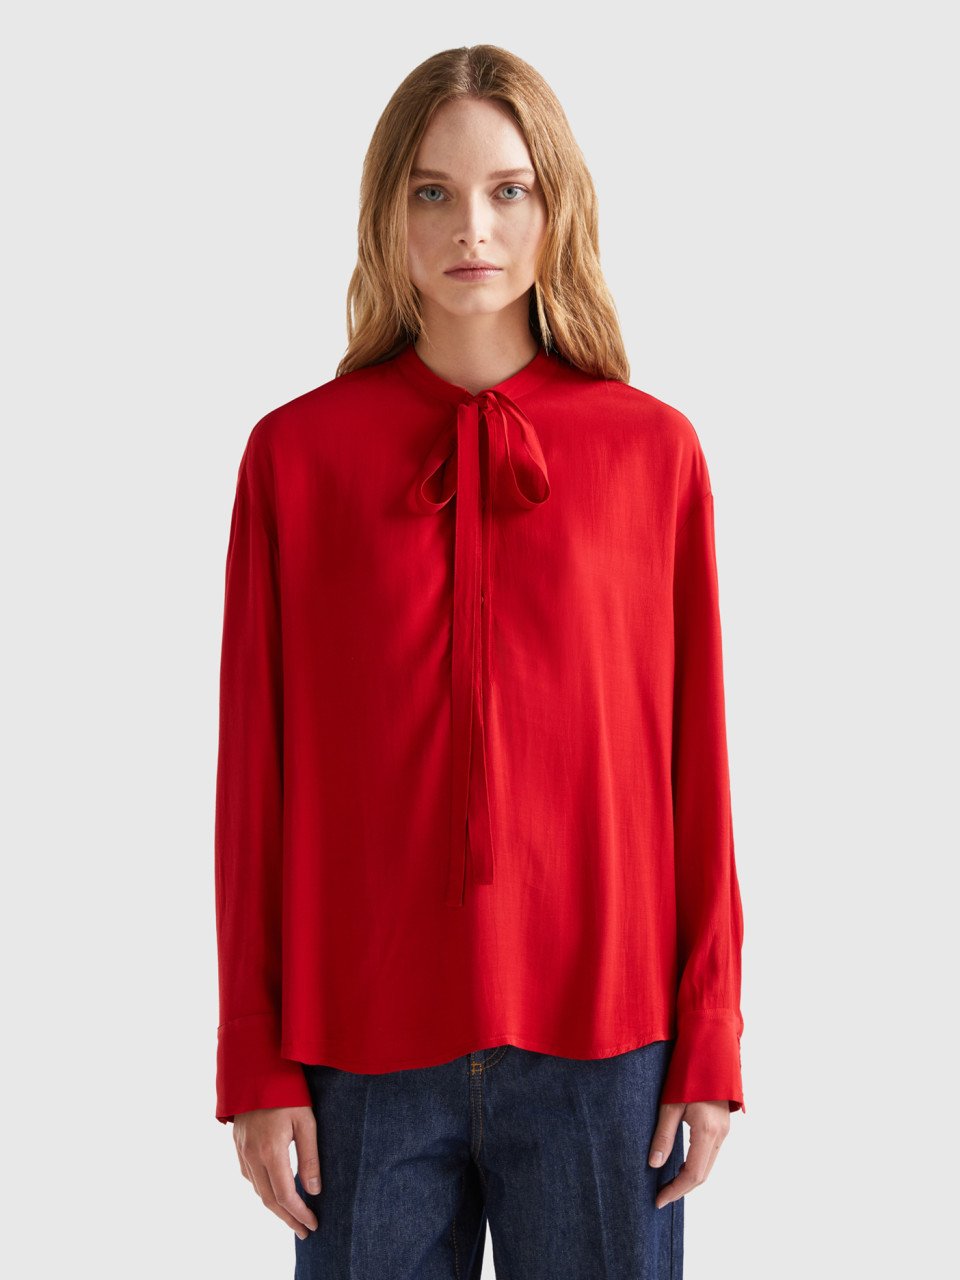 Benetton, Flowy Blouse With Laces, Red, Women